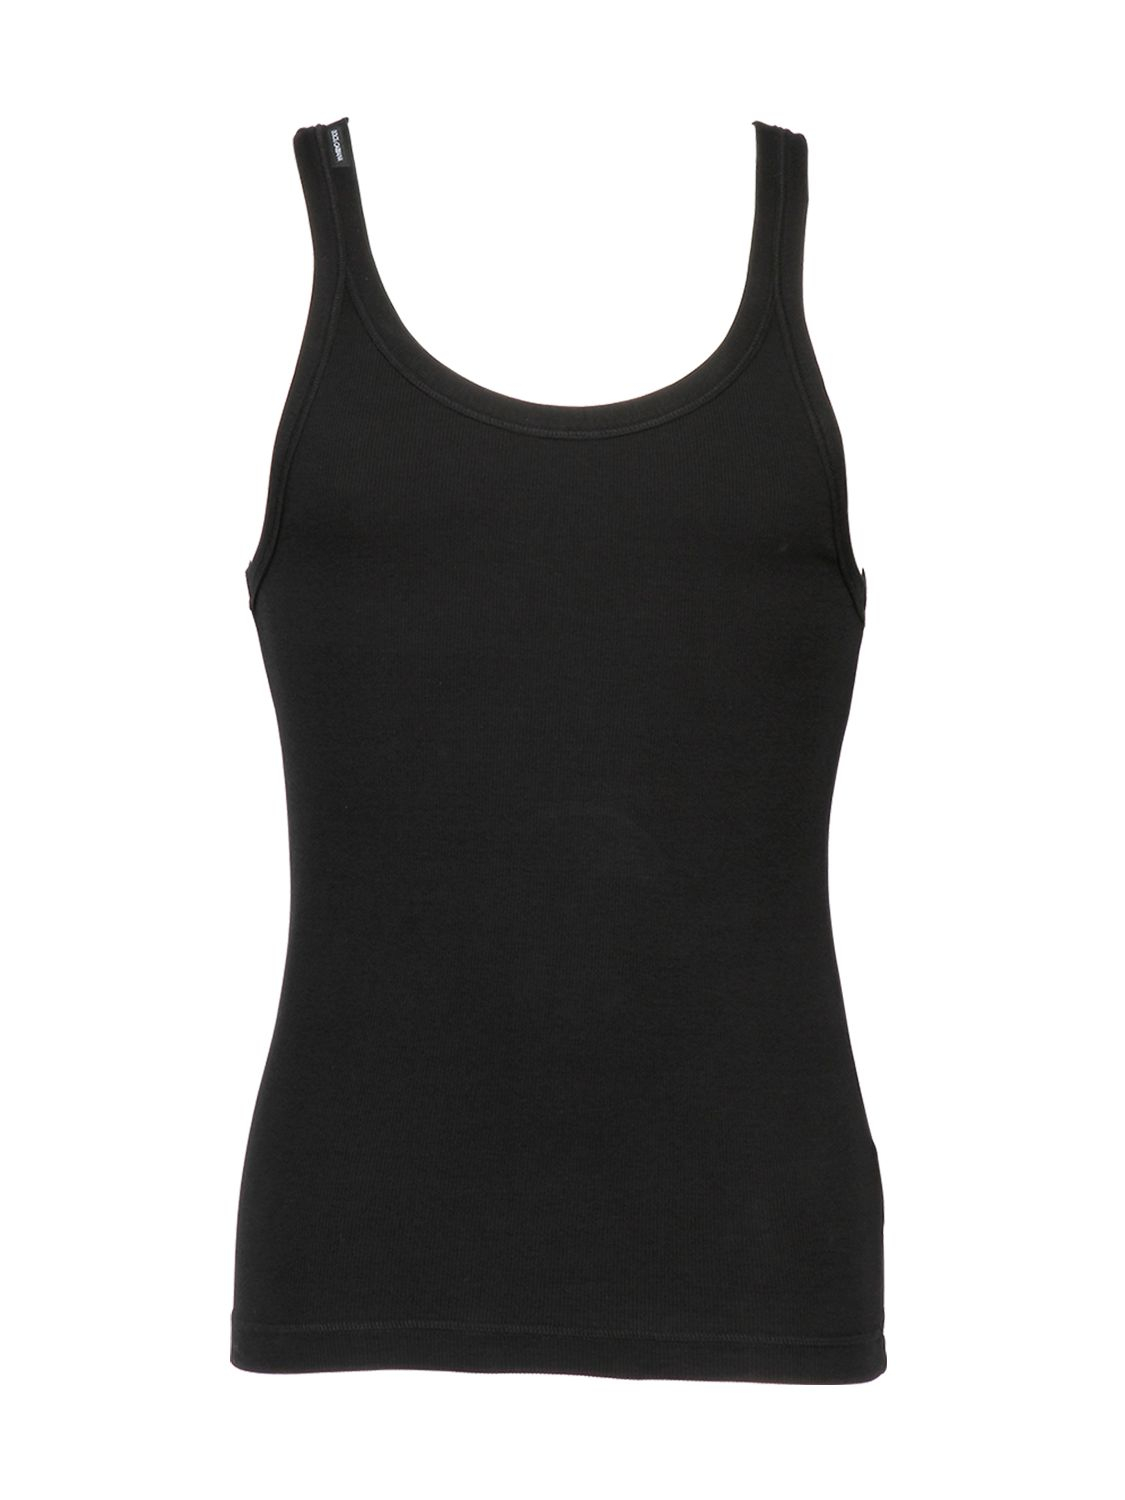 Lyst - Dolce & Gabbana Ribbed Stretch Cotton Jersey Tank Top in Black ...